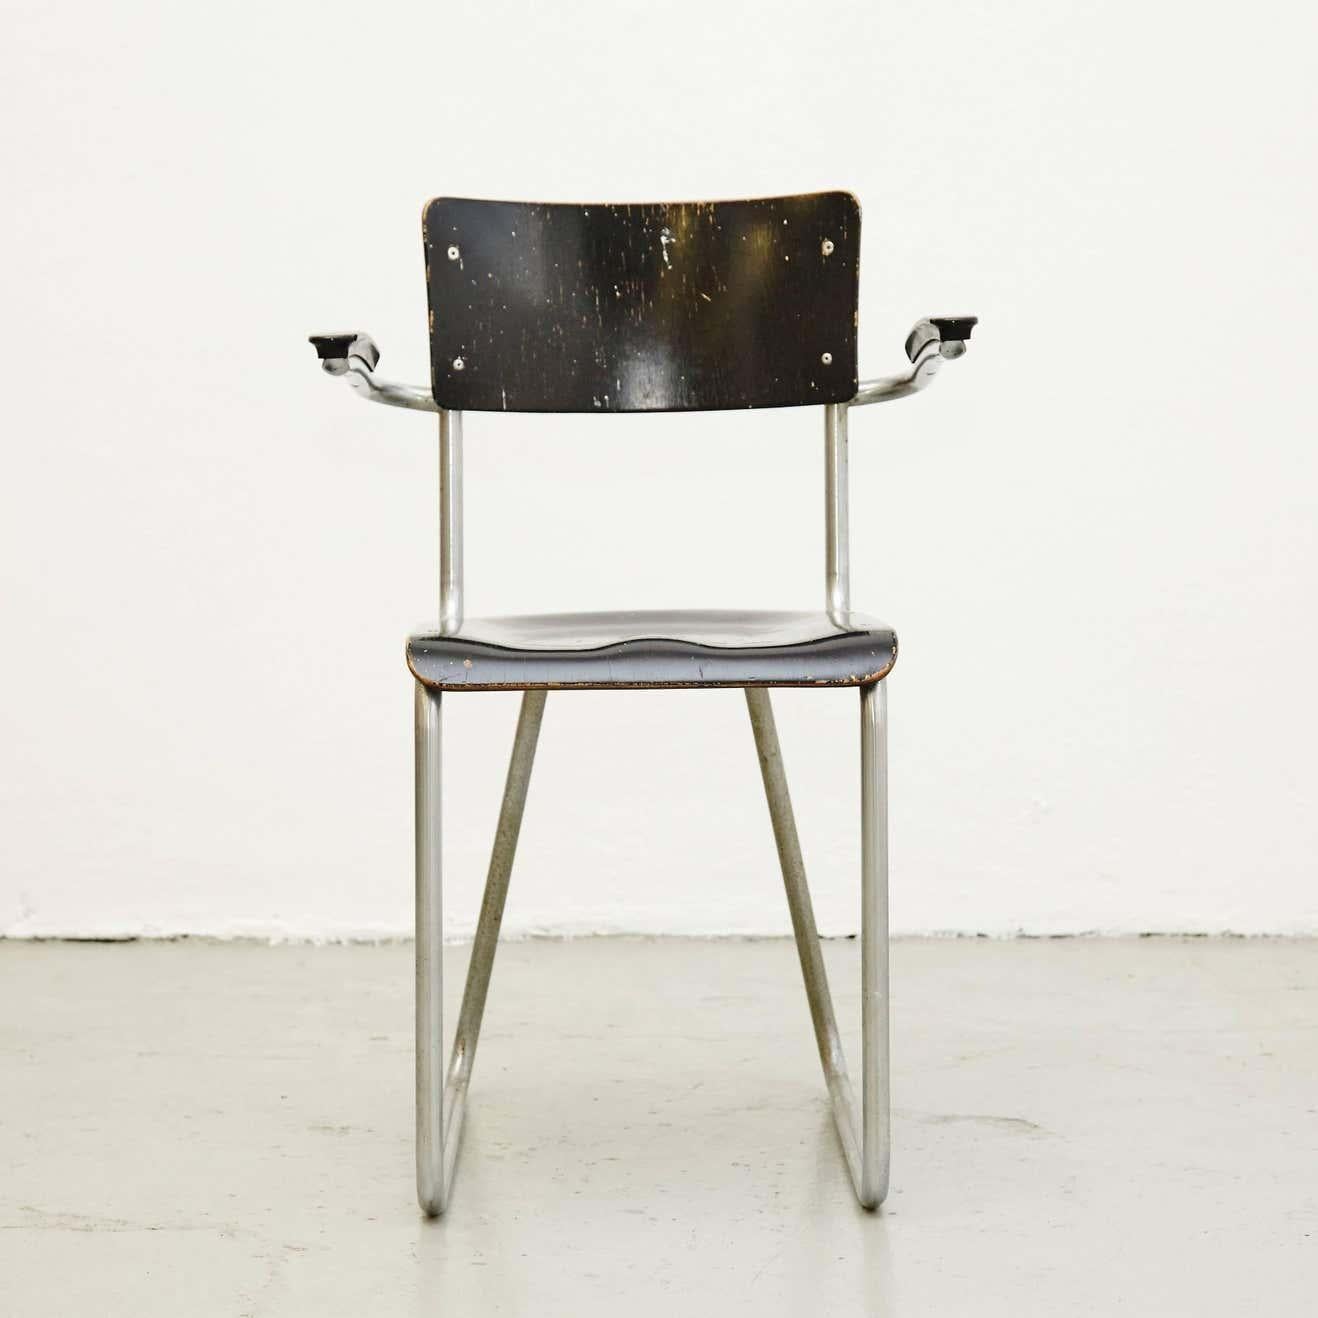 Bauhaus chair by unknown designer, probably Gispen.
Manufactured in Holland, circa 1930.

In good original condition with minor wear consistent with age and use.